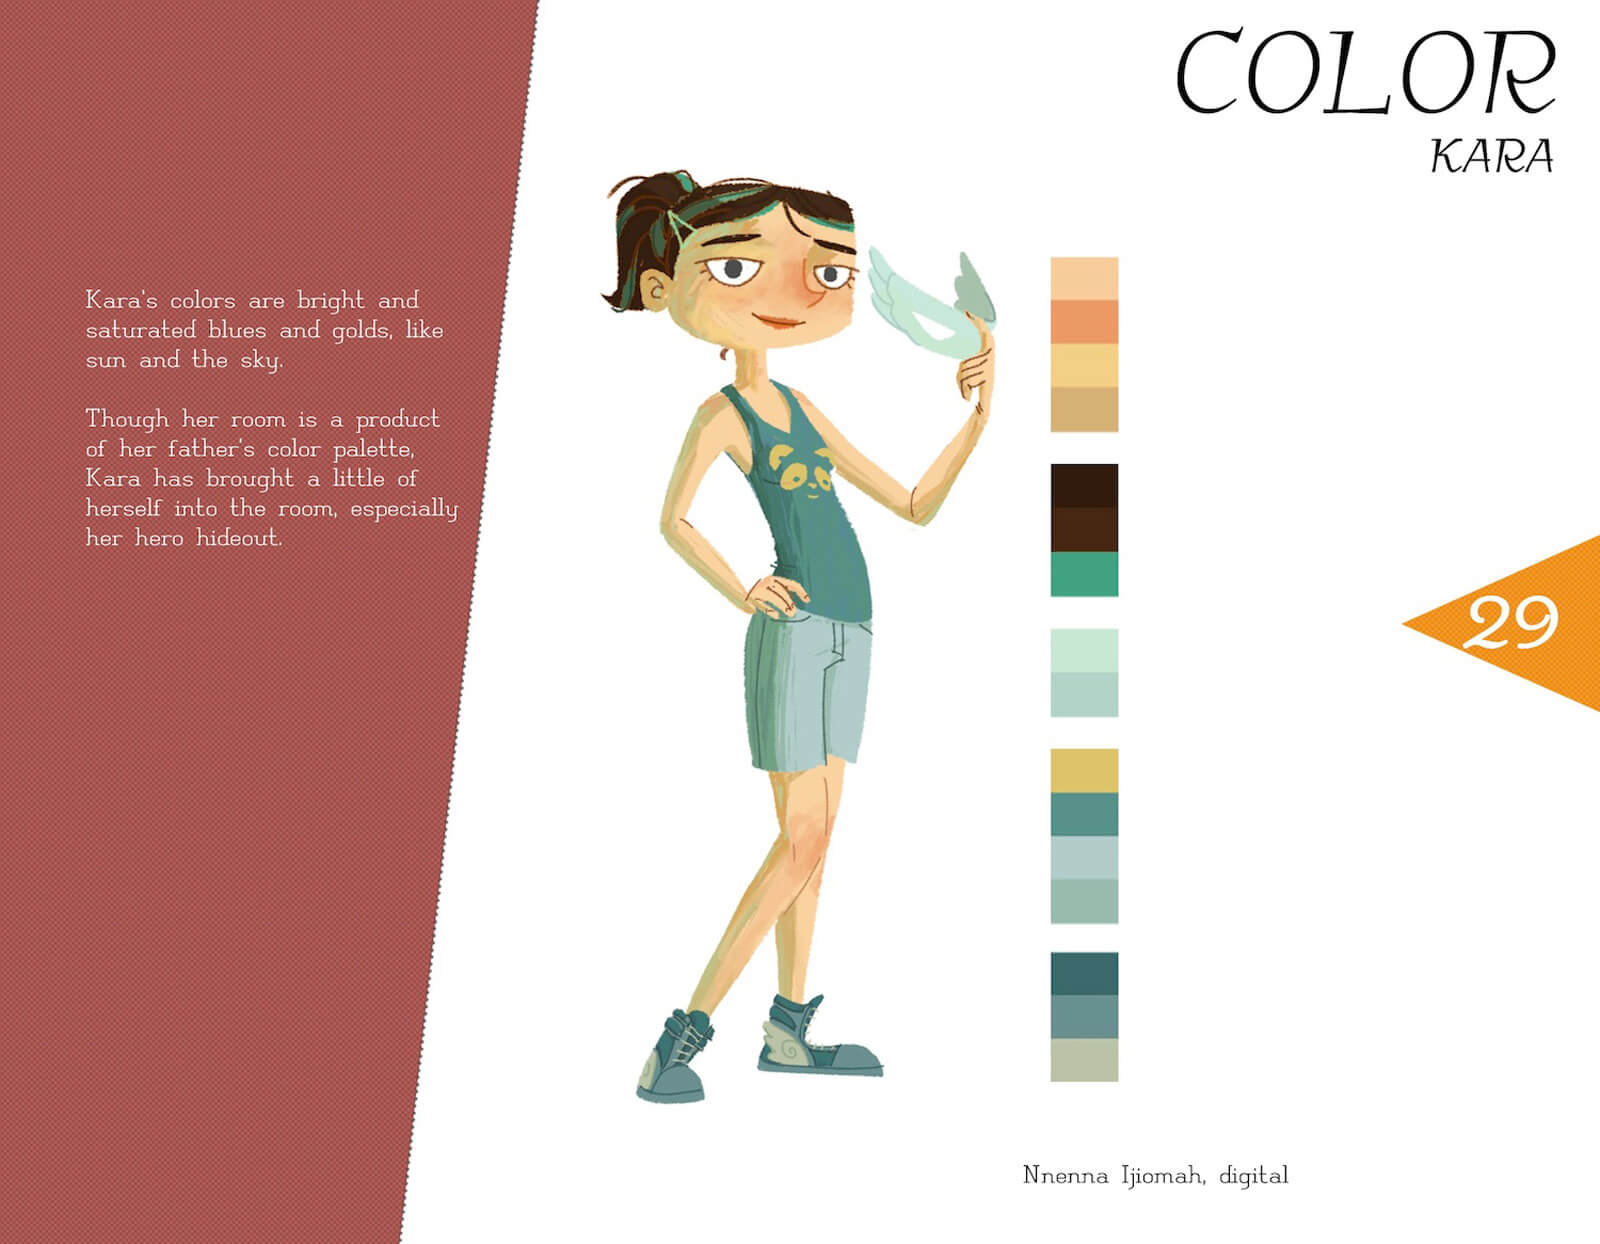 Color profile of the character Kara von Koerndaug, with a posing kara in a teal outfit, holding a light aqua mask